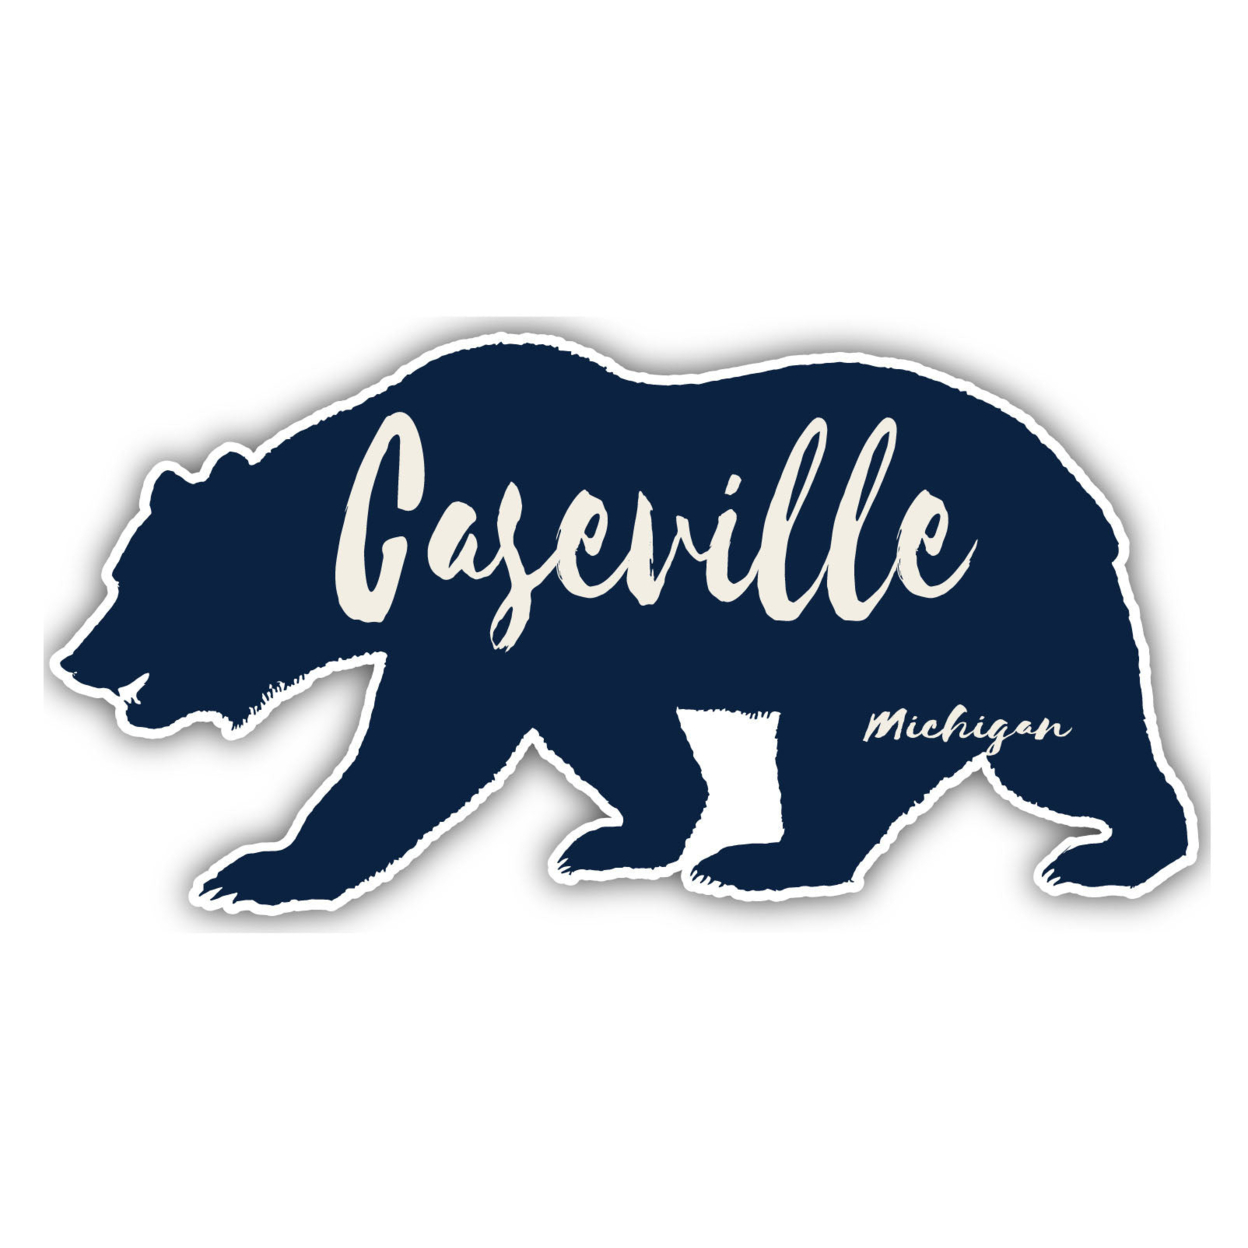 Caseville Michigan Souvenir Decorative Stickers (Choose Theme And Size) - Single Unit, 2-Inch, Great Outdoors